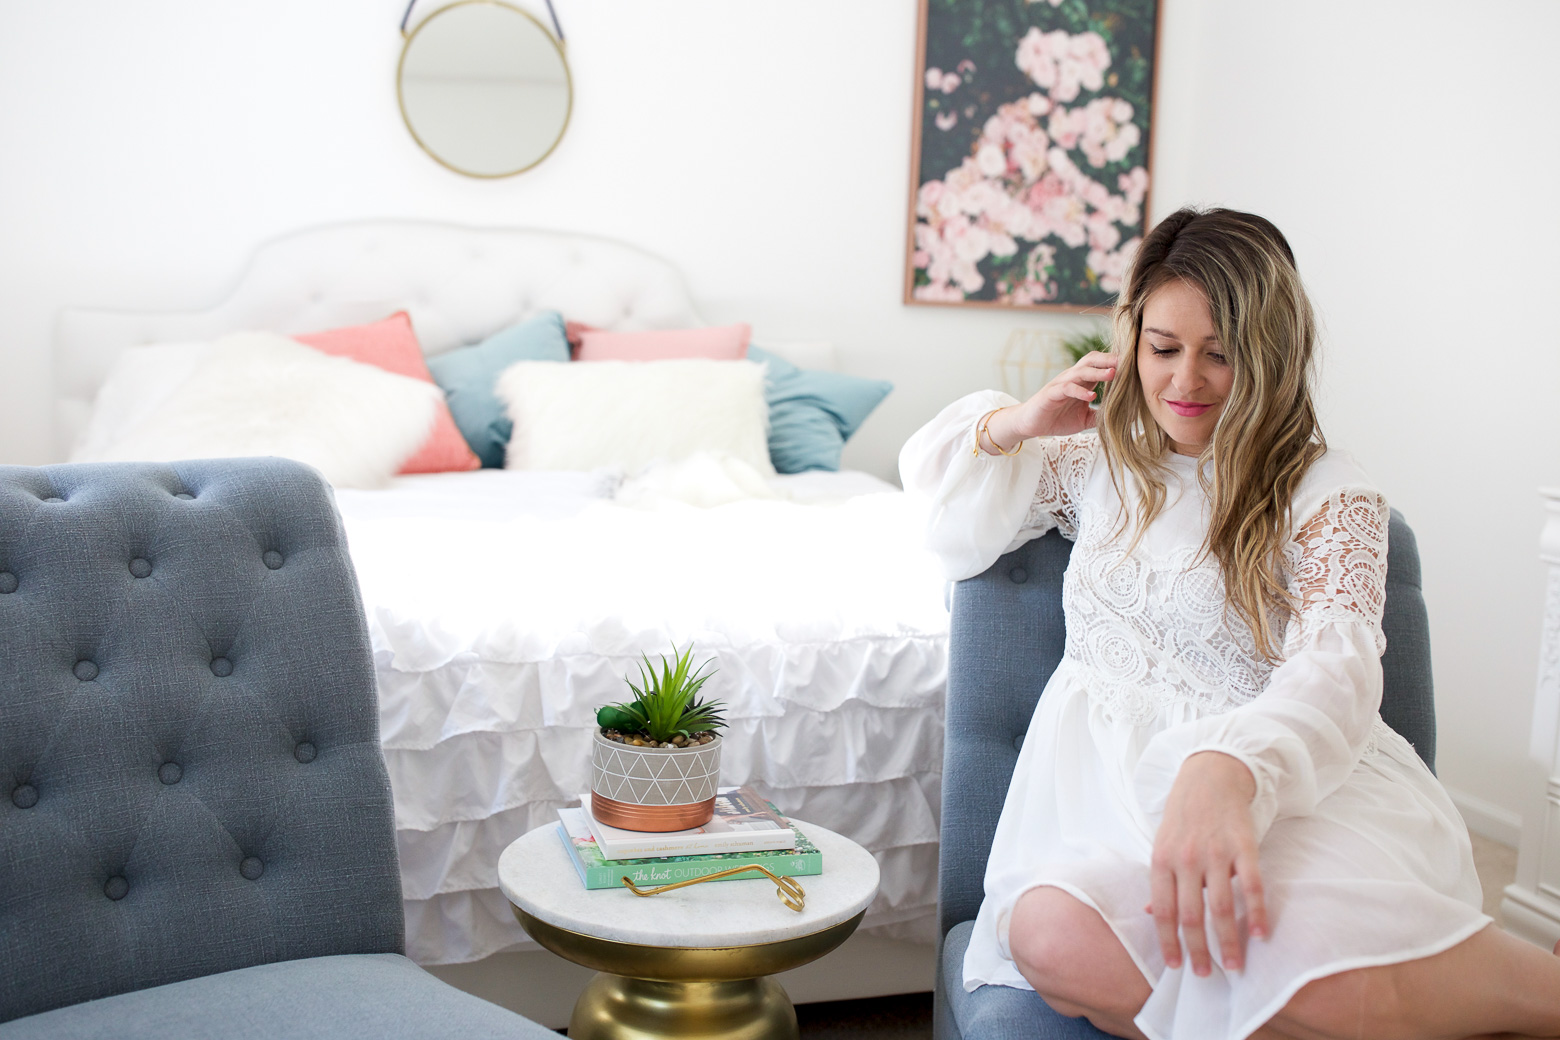 Who else loves a great bedroom makeover? Chicago Lifestyle Blogger Happily Inspired is sharing her chic bedroom makeover. See it here!